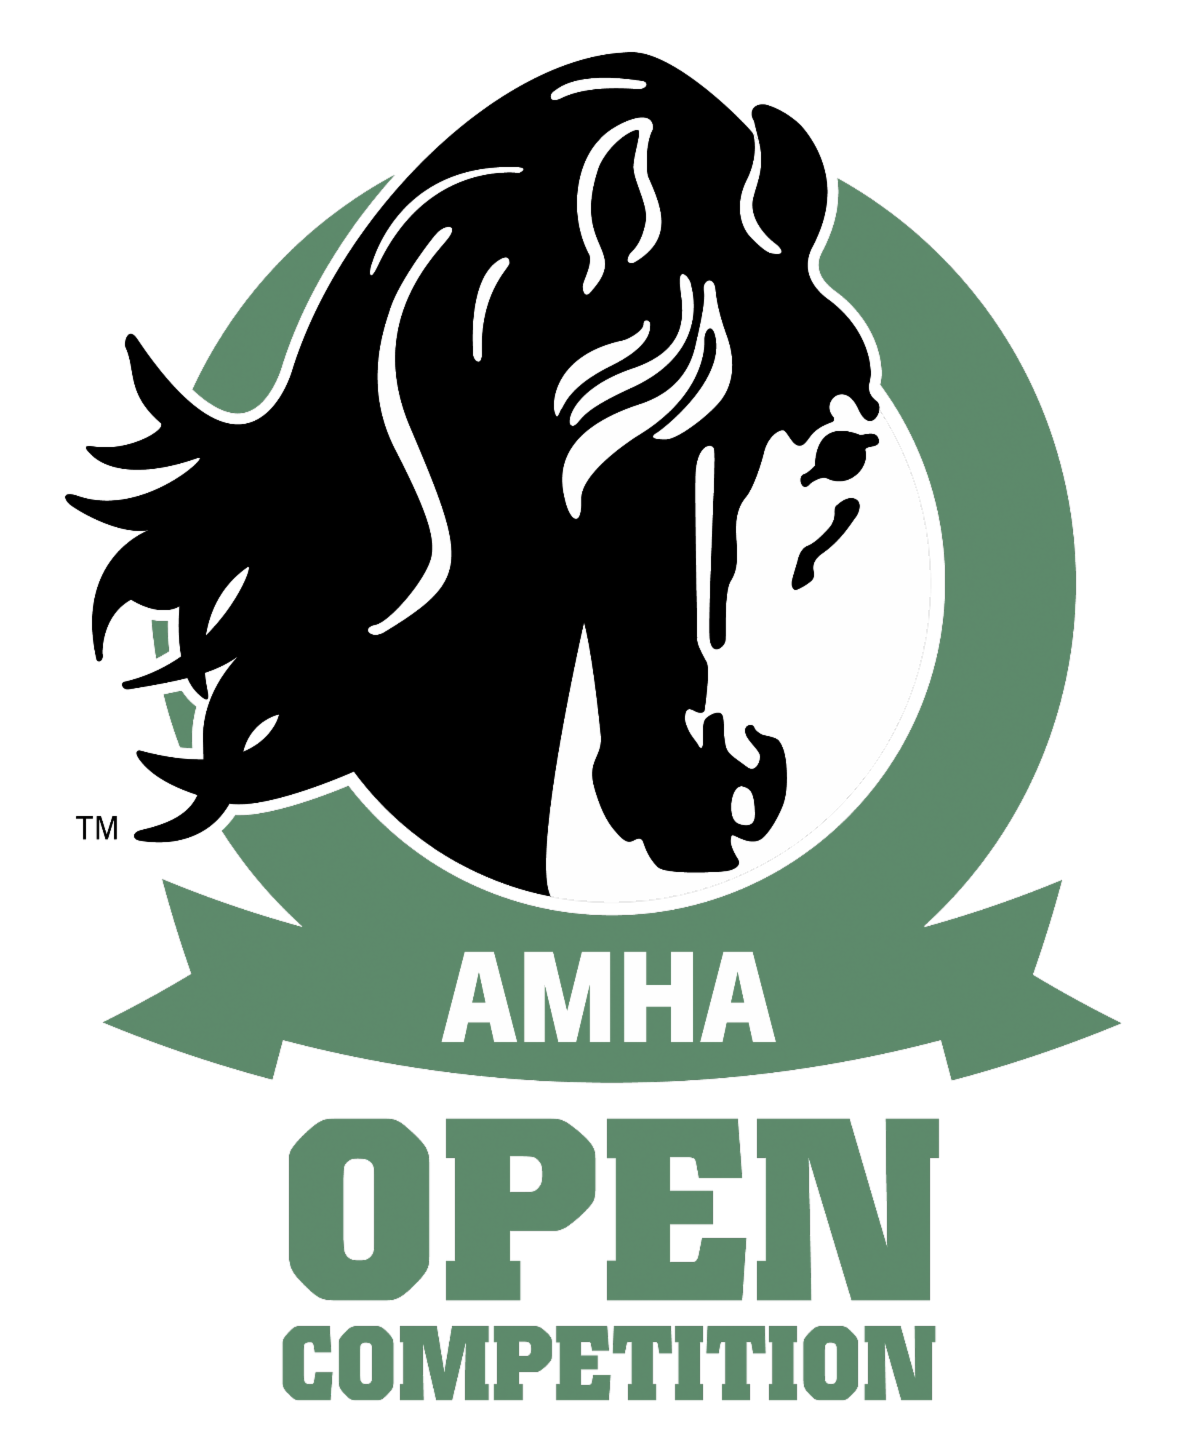 news_amhaprogram_logos_open_competition.png